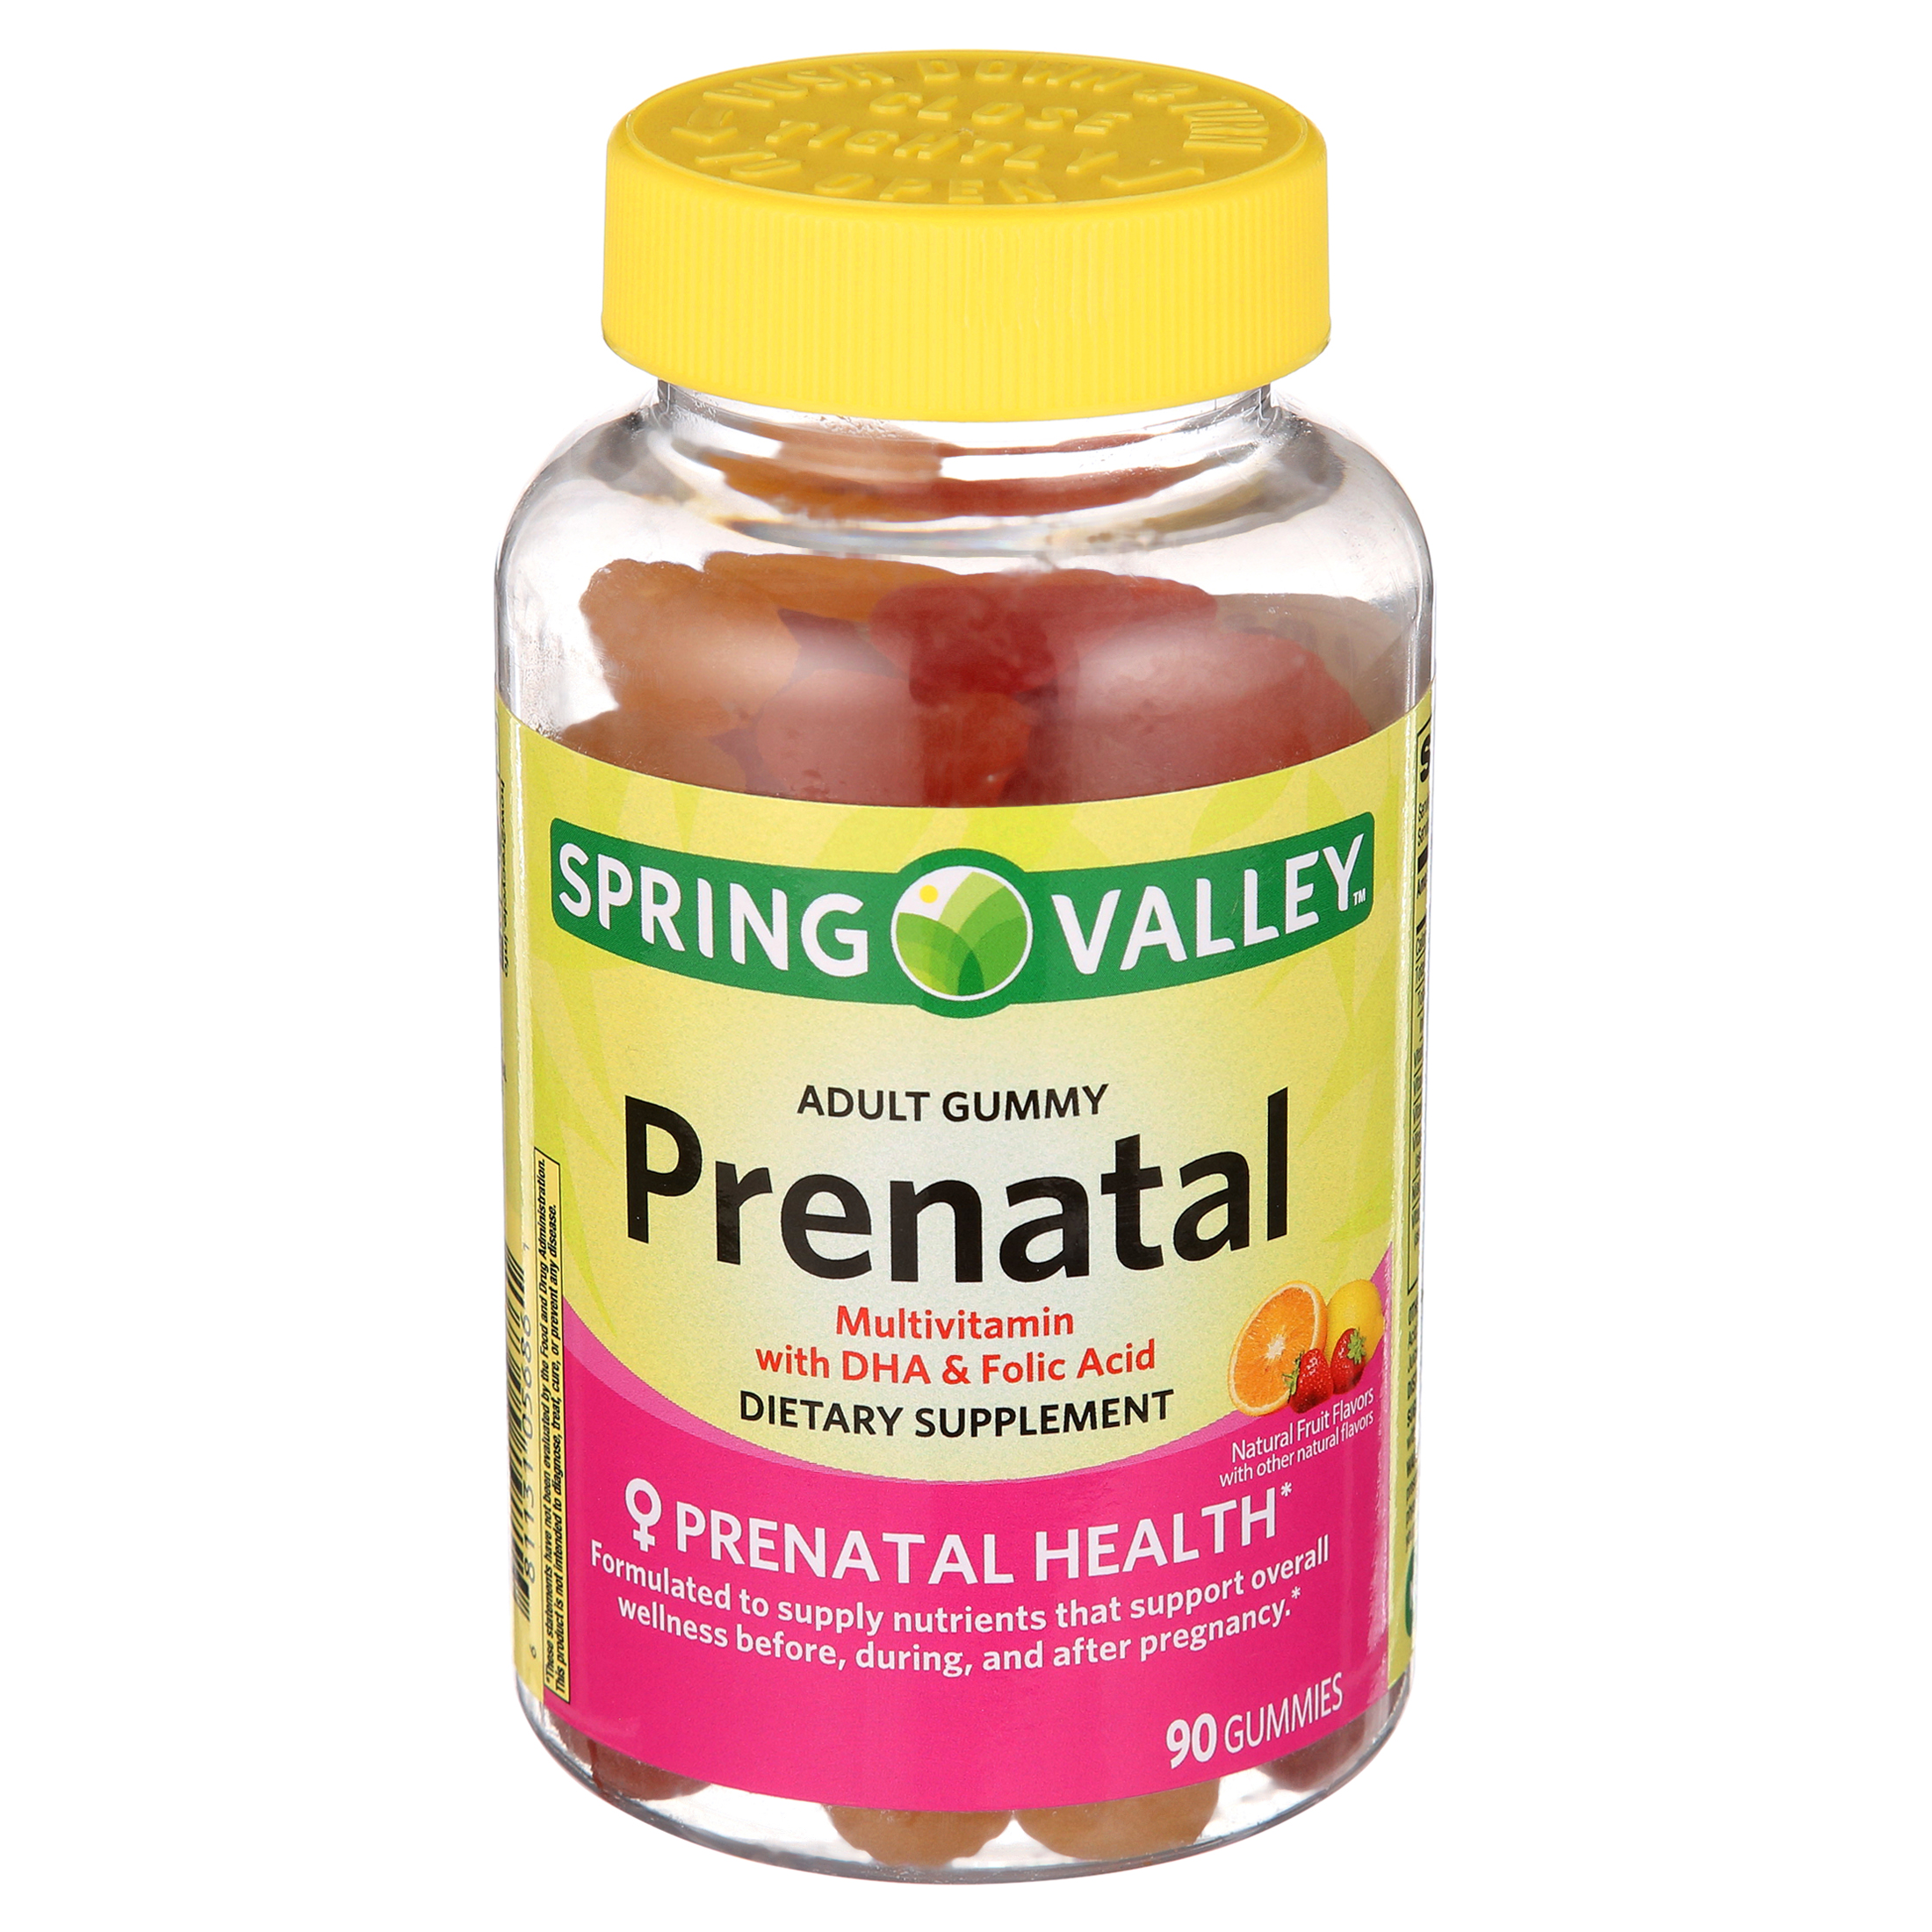 Spring Valley Prenatal Multivitamin Gummies with DHA and Folic Acid, 90 Count - image 5 of 7